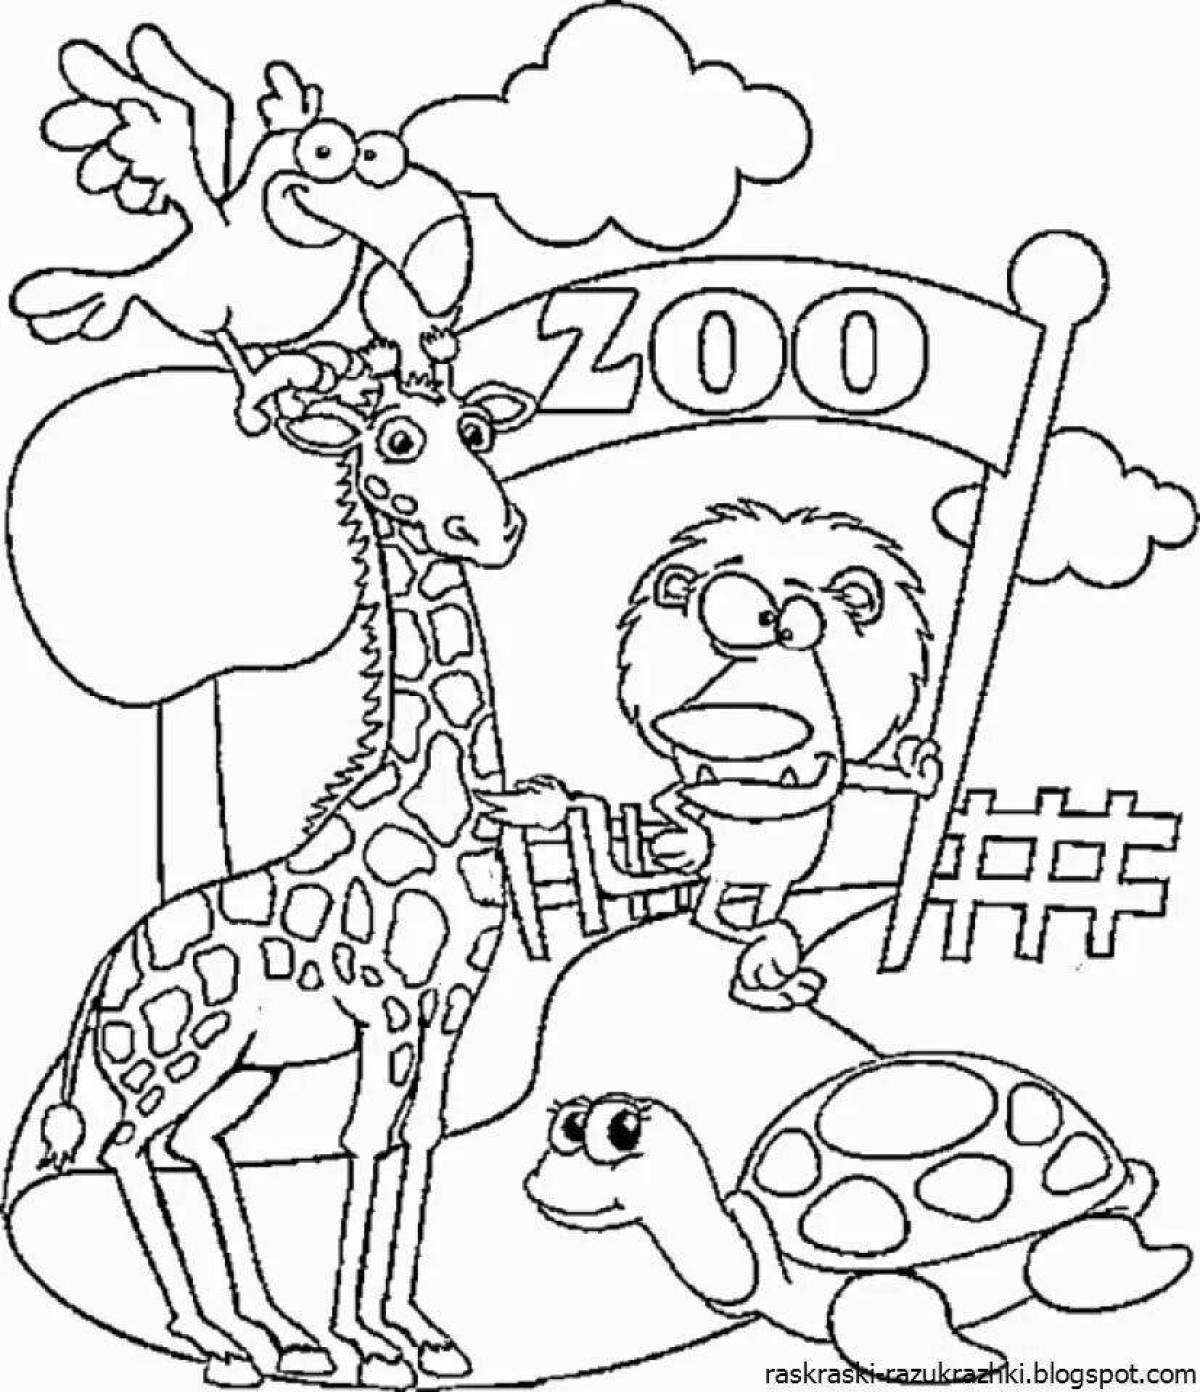 Zoo animals for kids #3